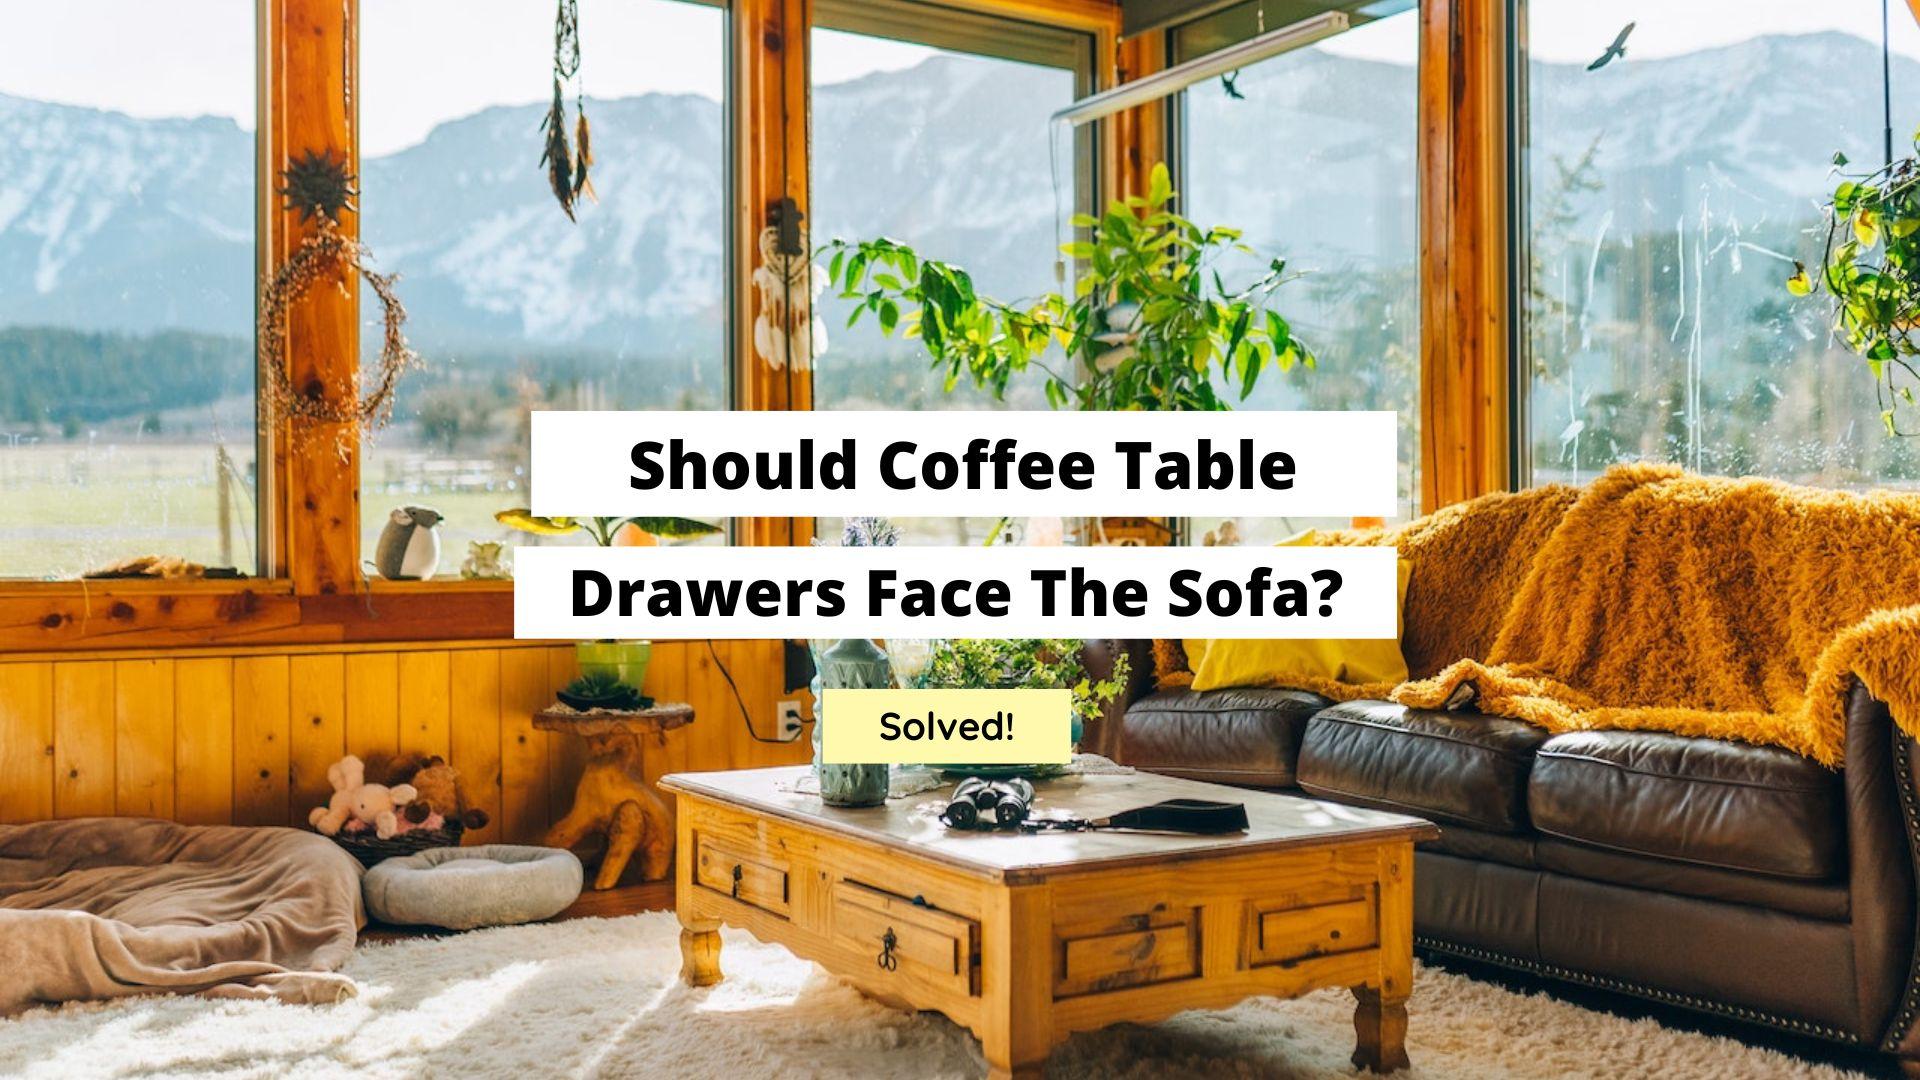 Should Coffee Table Drawers Face The Sofa